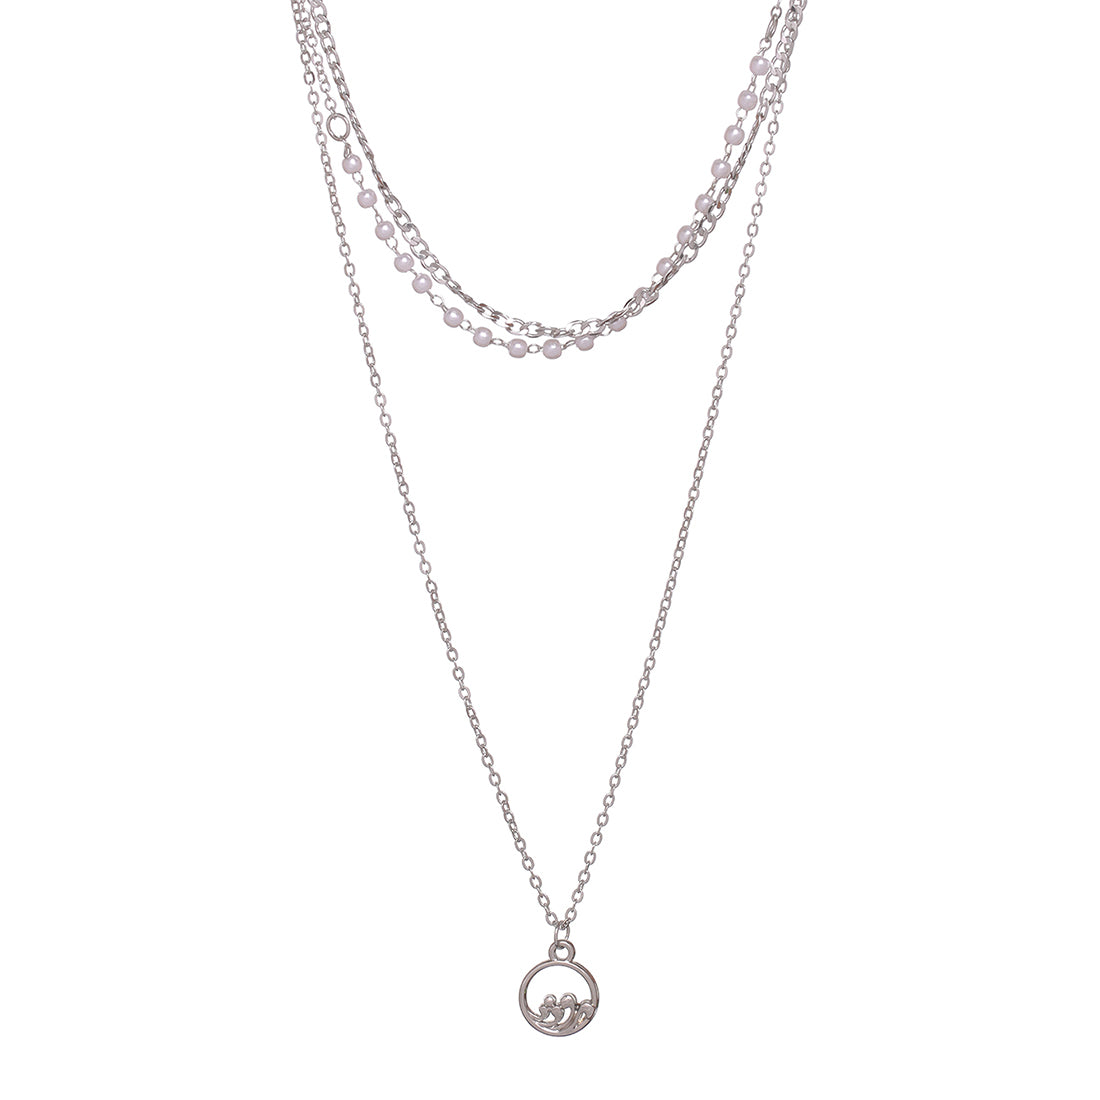 3-Layered Silver Chain Necklace With Delicate Pearls And Minimalist Rhinestone Pendant